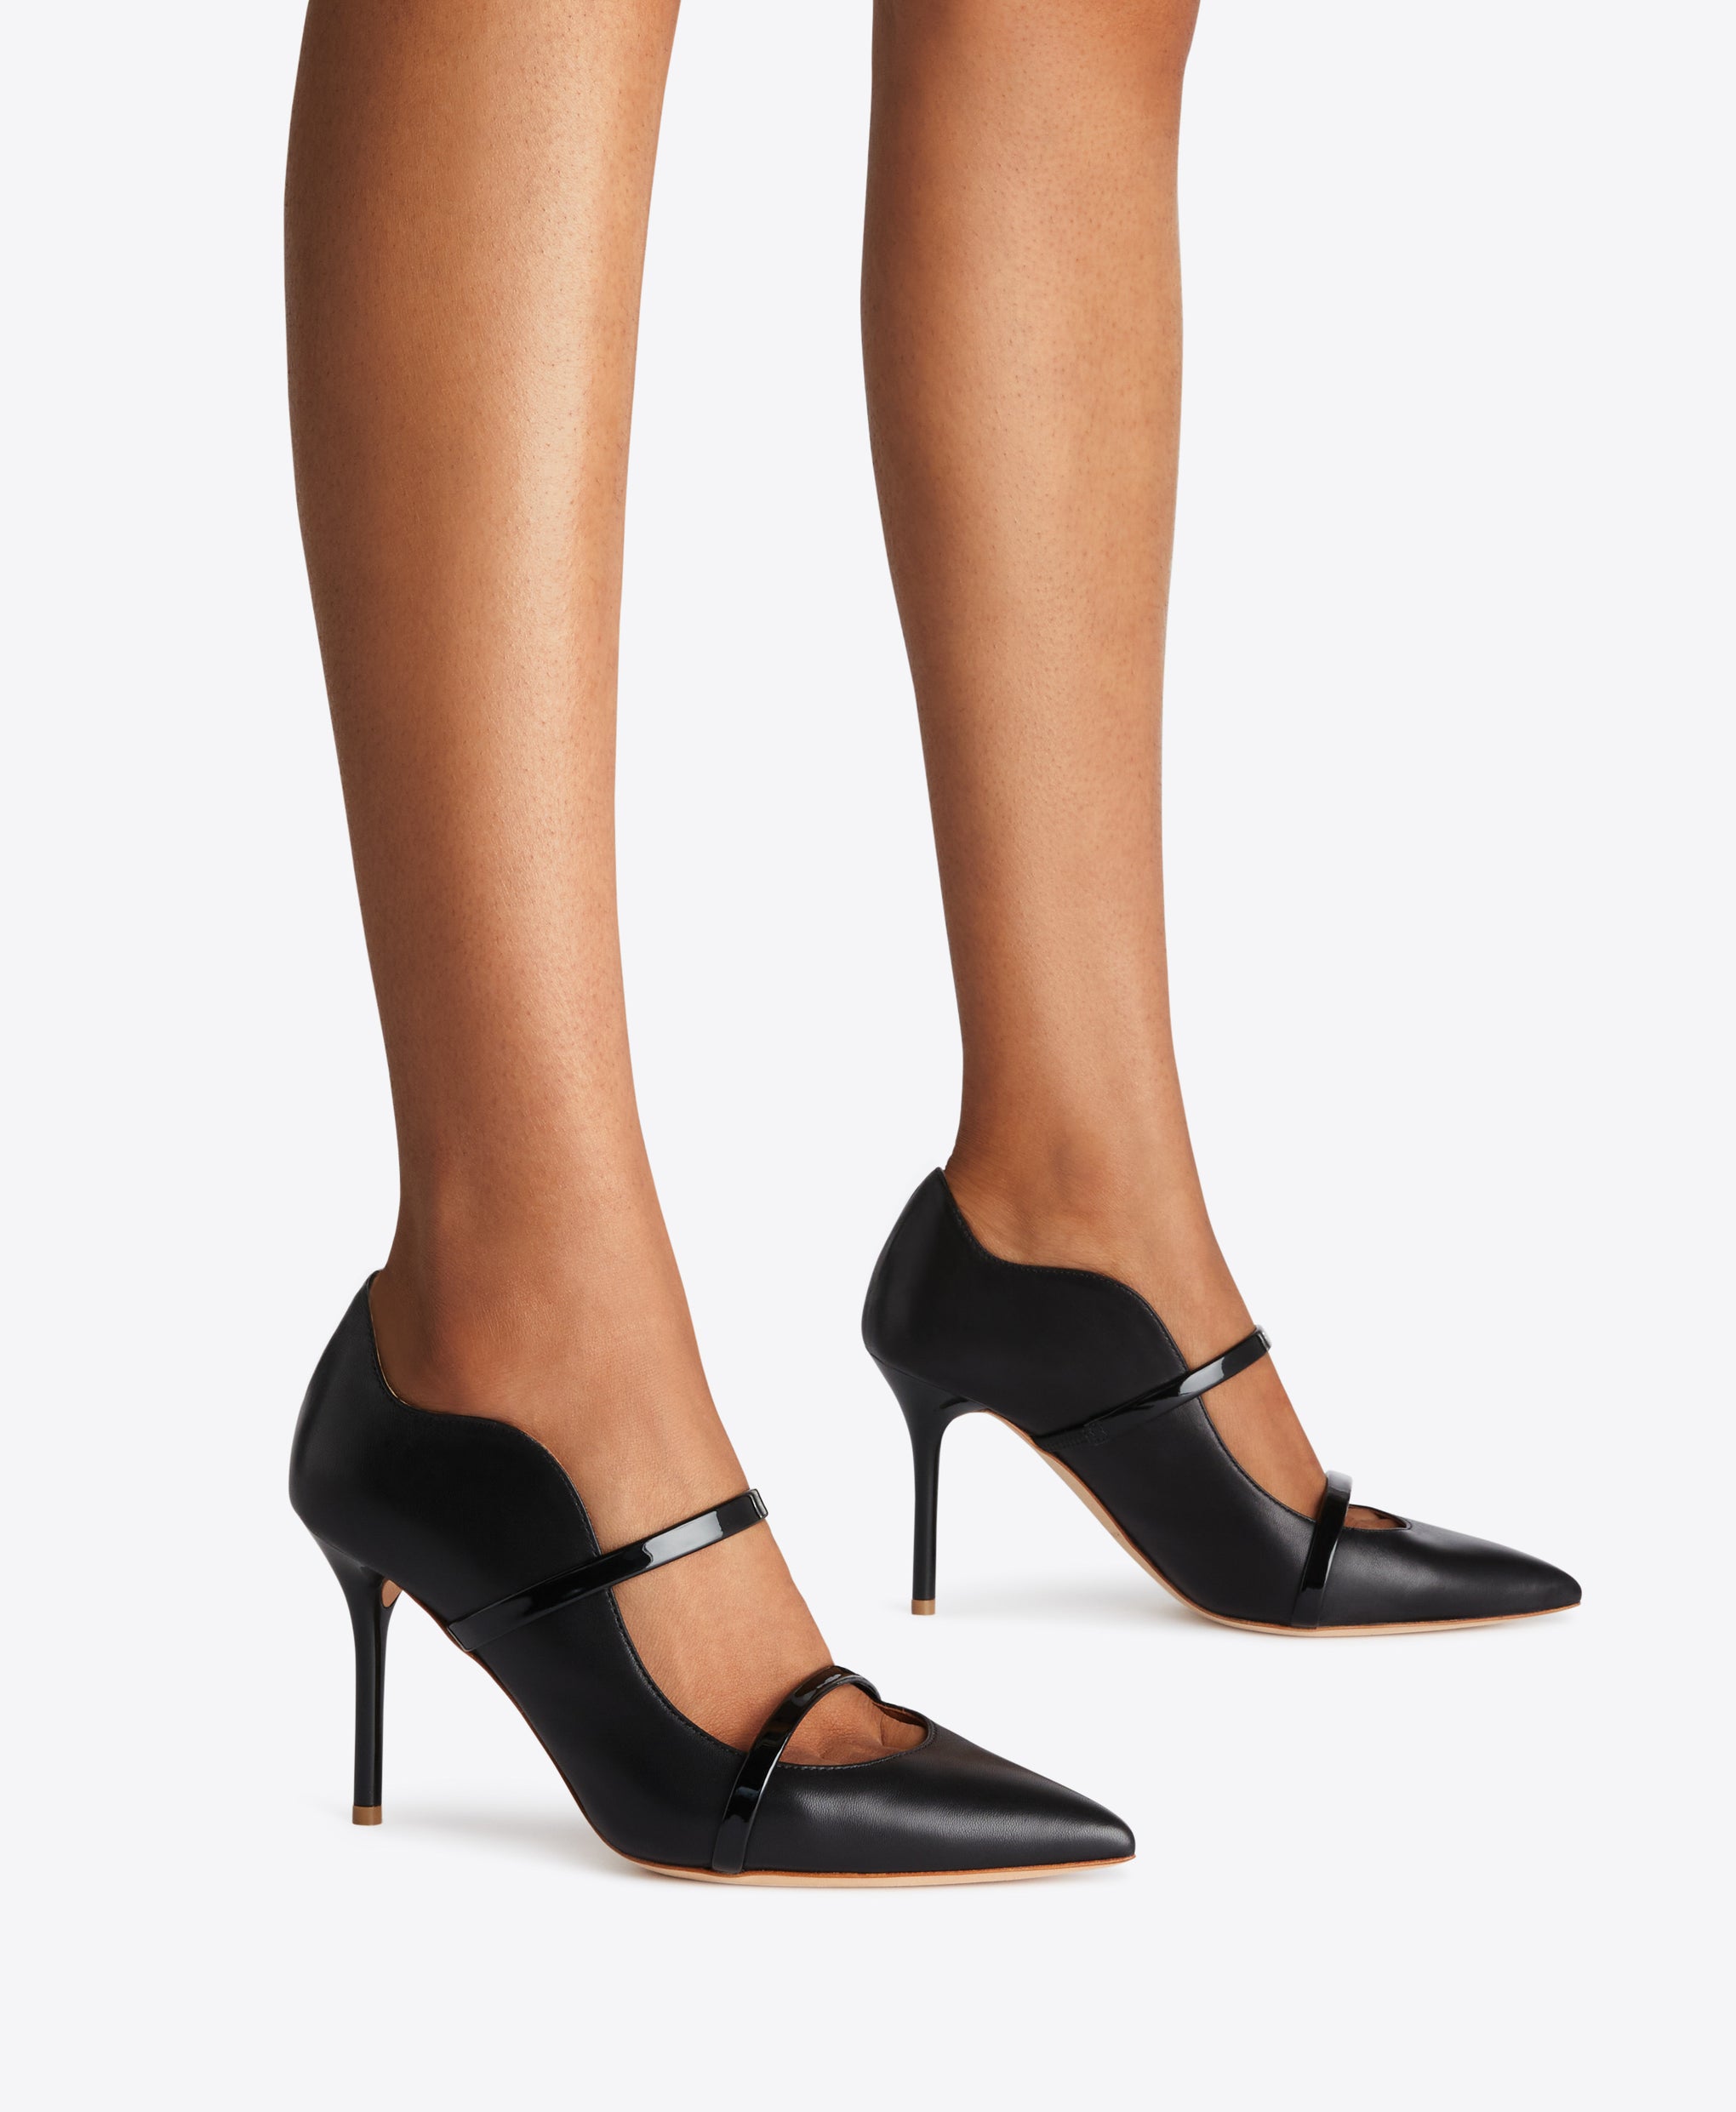 Malone Souliers Maureen 85 Black Leather Heeled Pumps